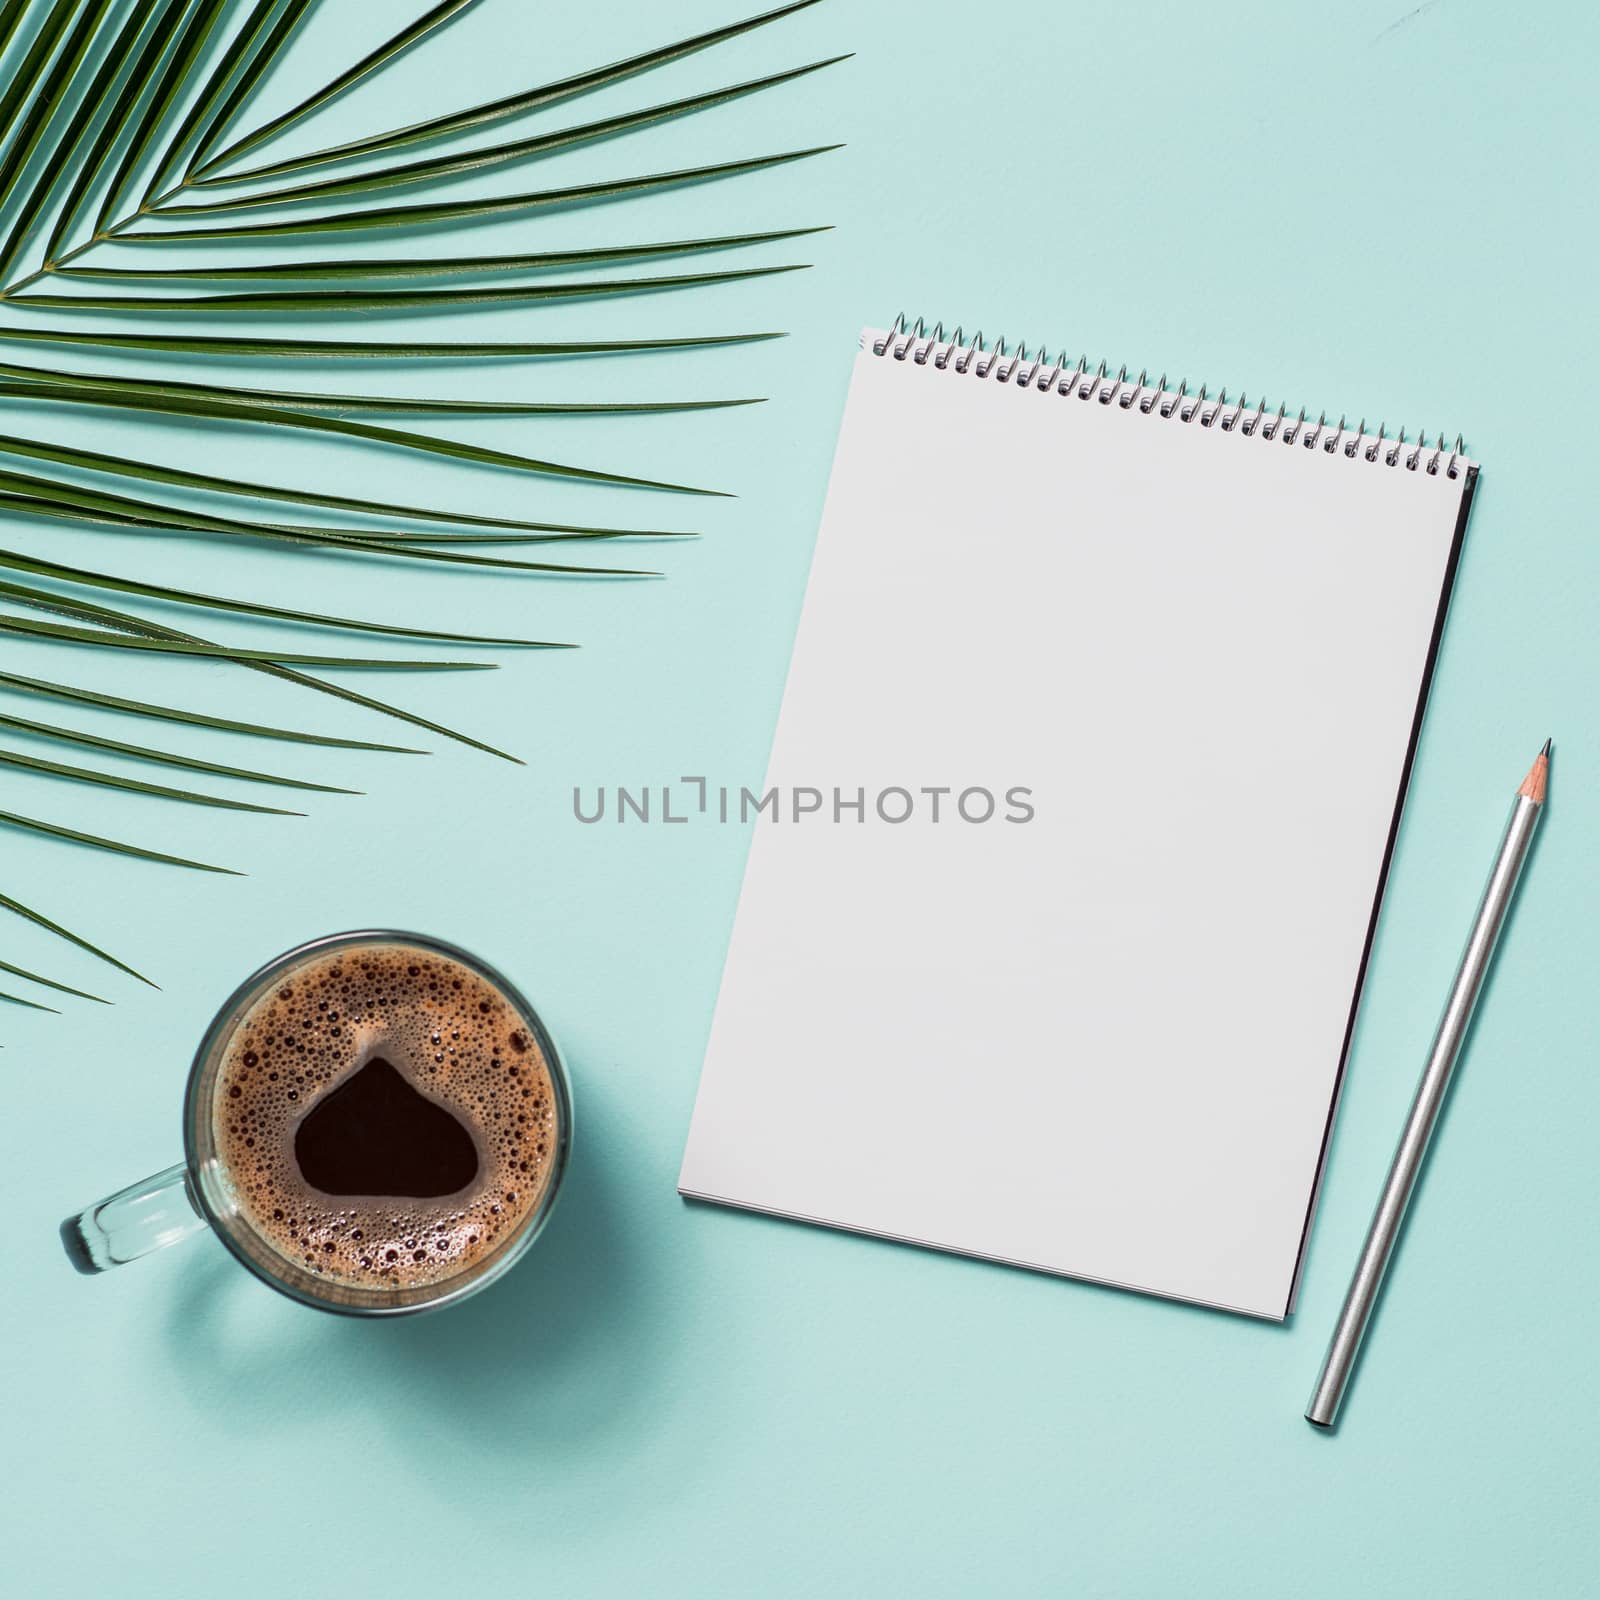 Blank paper notebook with pencil and coffee cup. Empty paper sketchbook with pincil and tropical leaves on blue background. Top view or flat lay. Copy space for text or design.